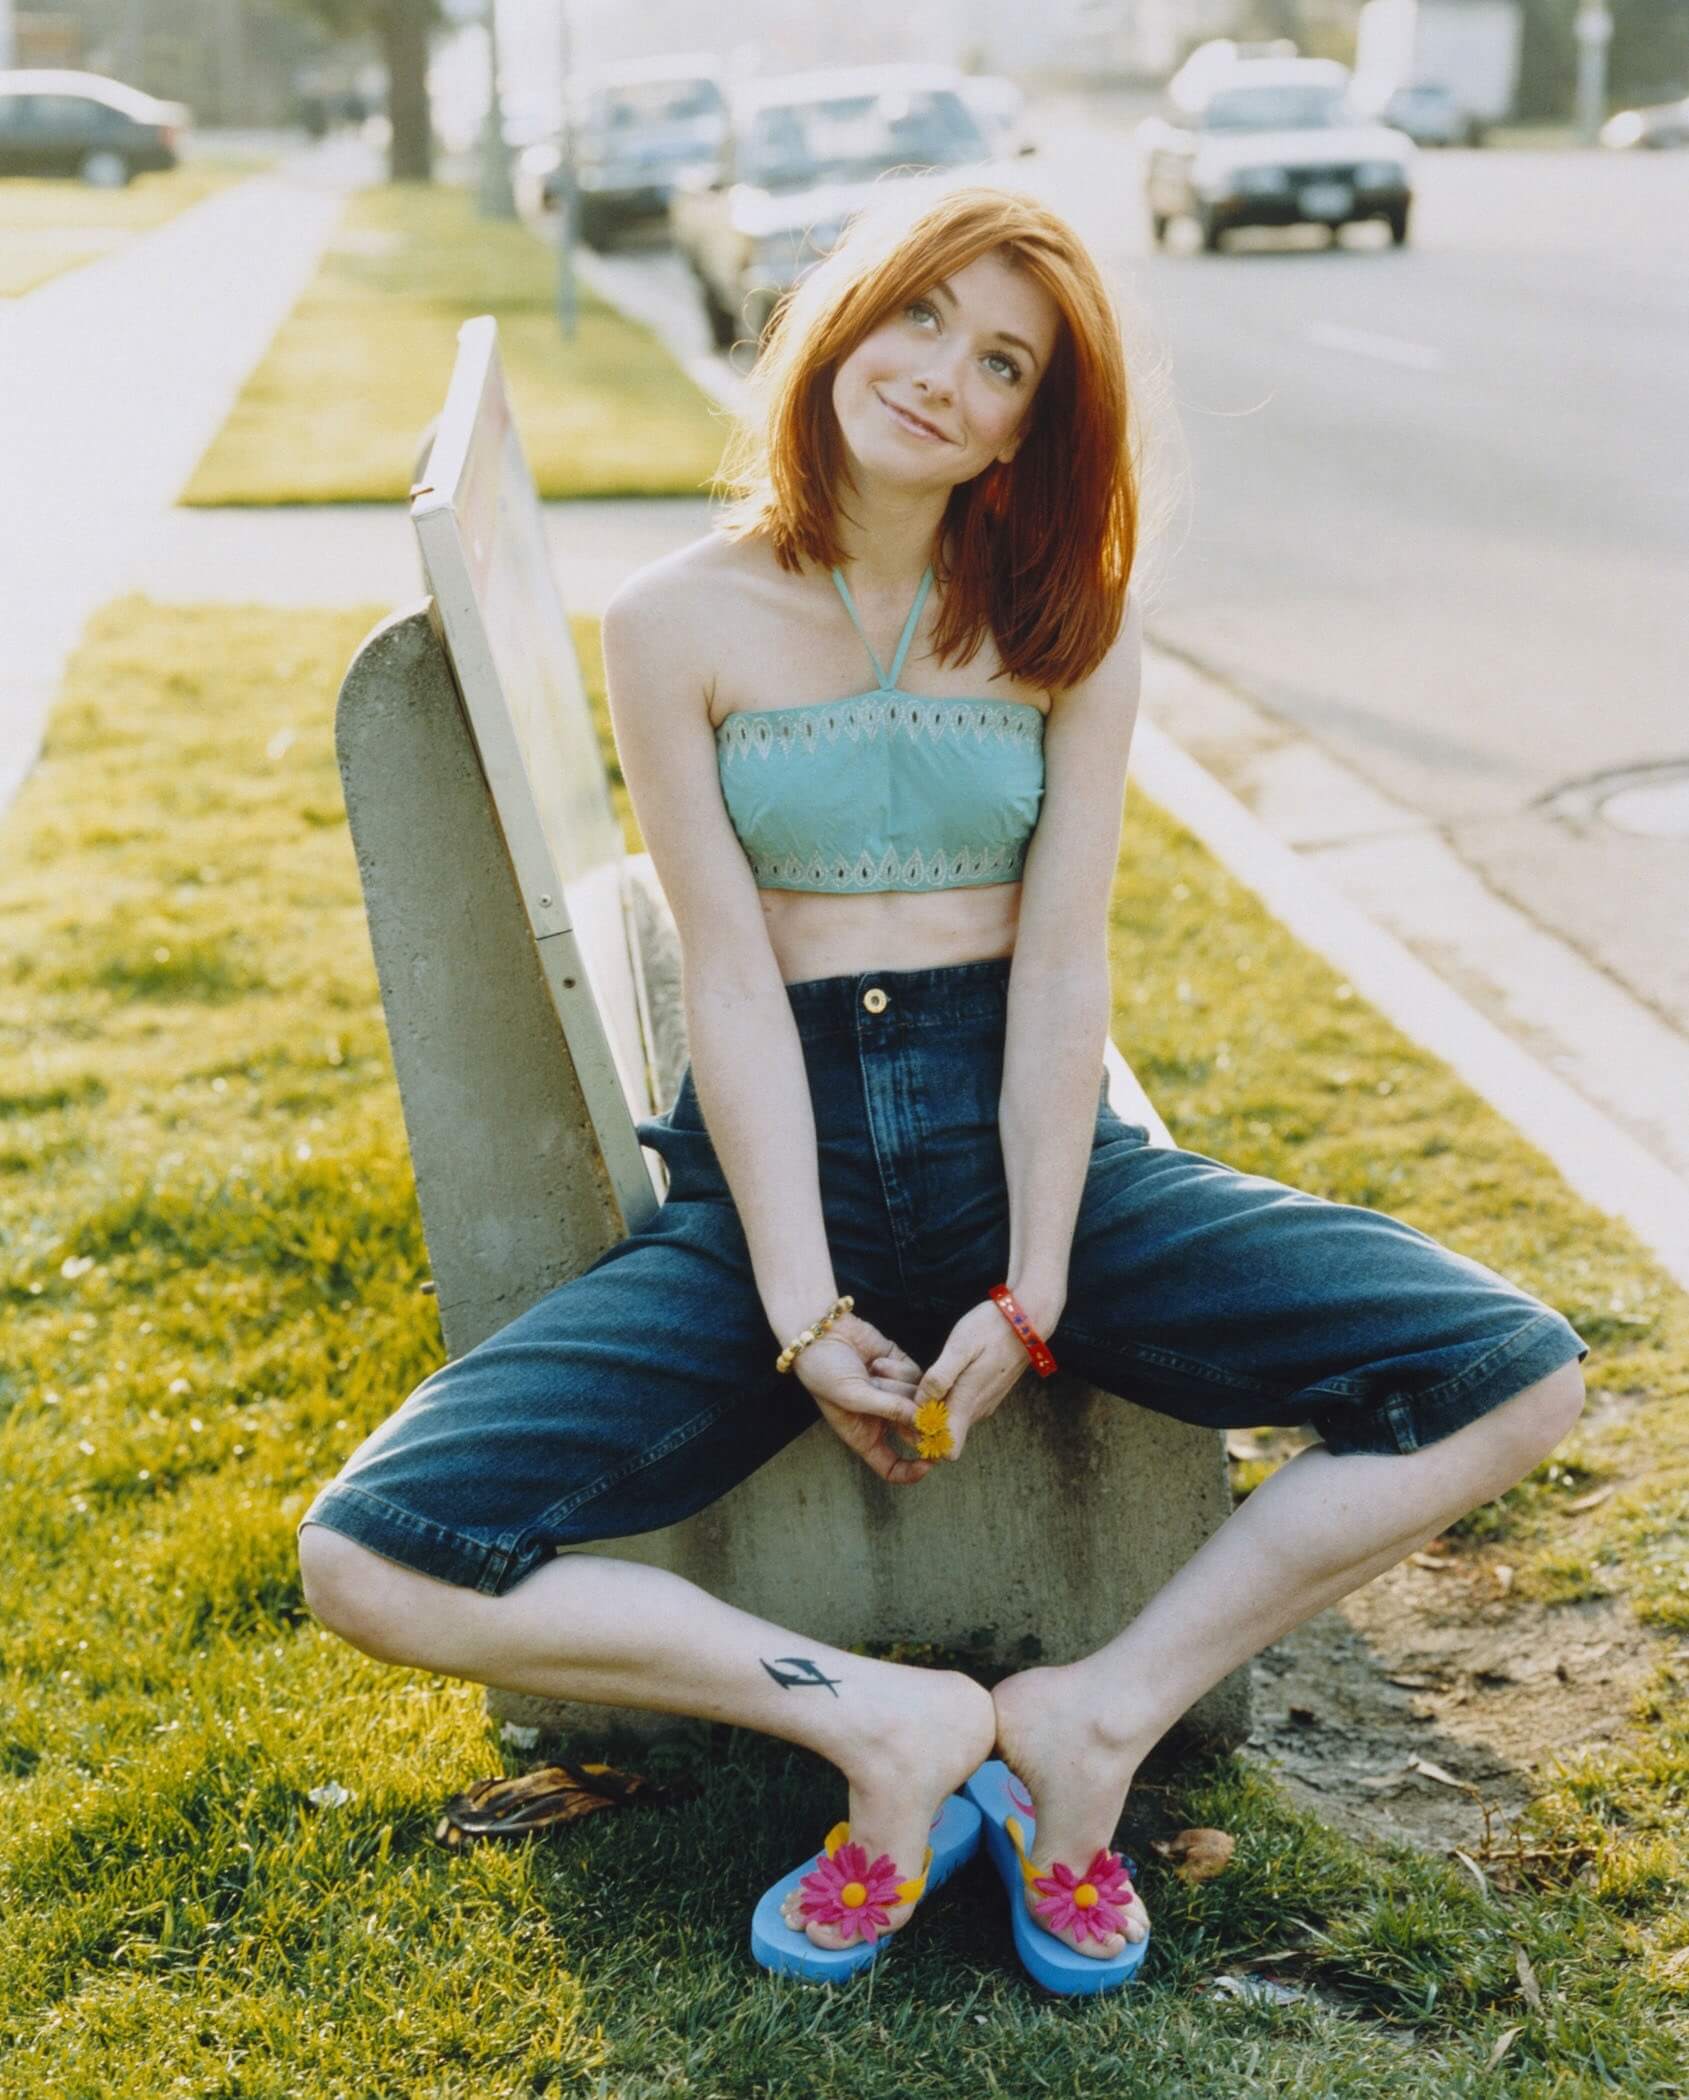 49 Sexy Alyson Hannigan Feet Pictures Are Heaven On Earth | Best Of Comic Books